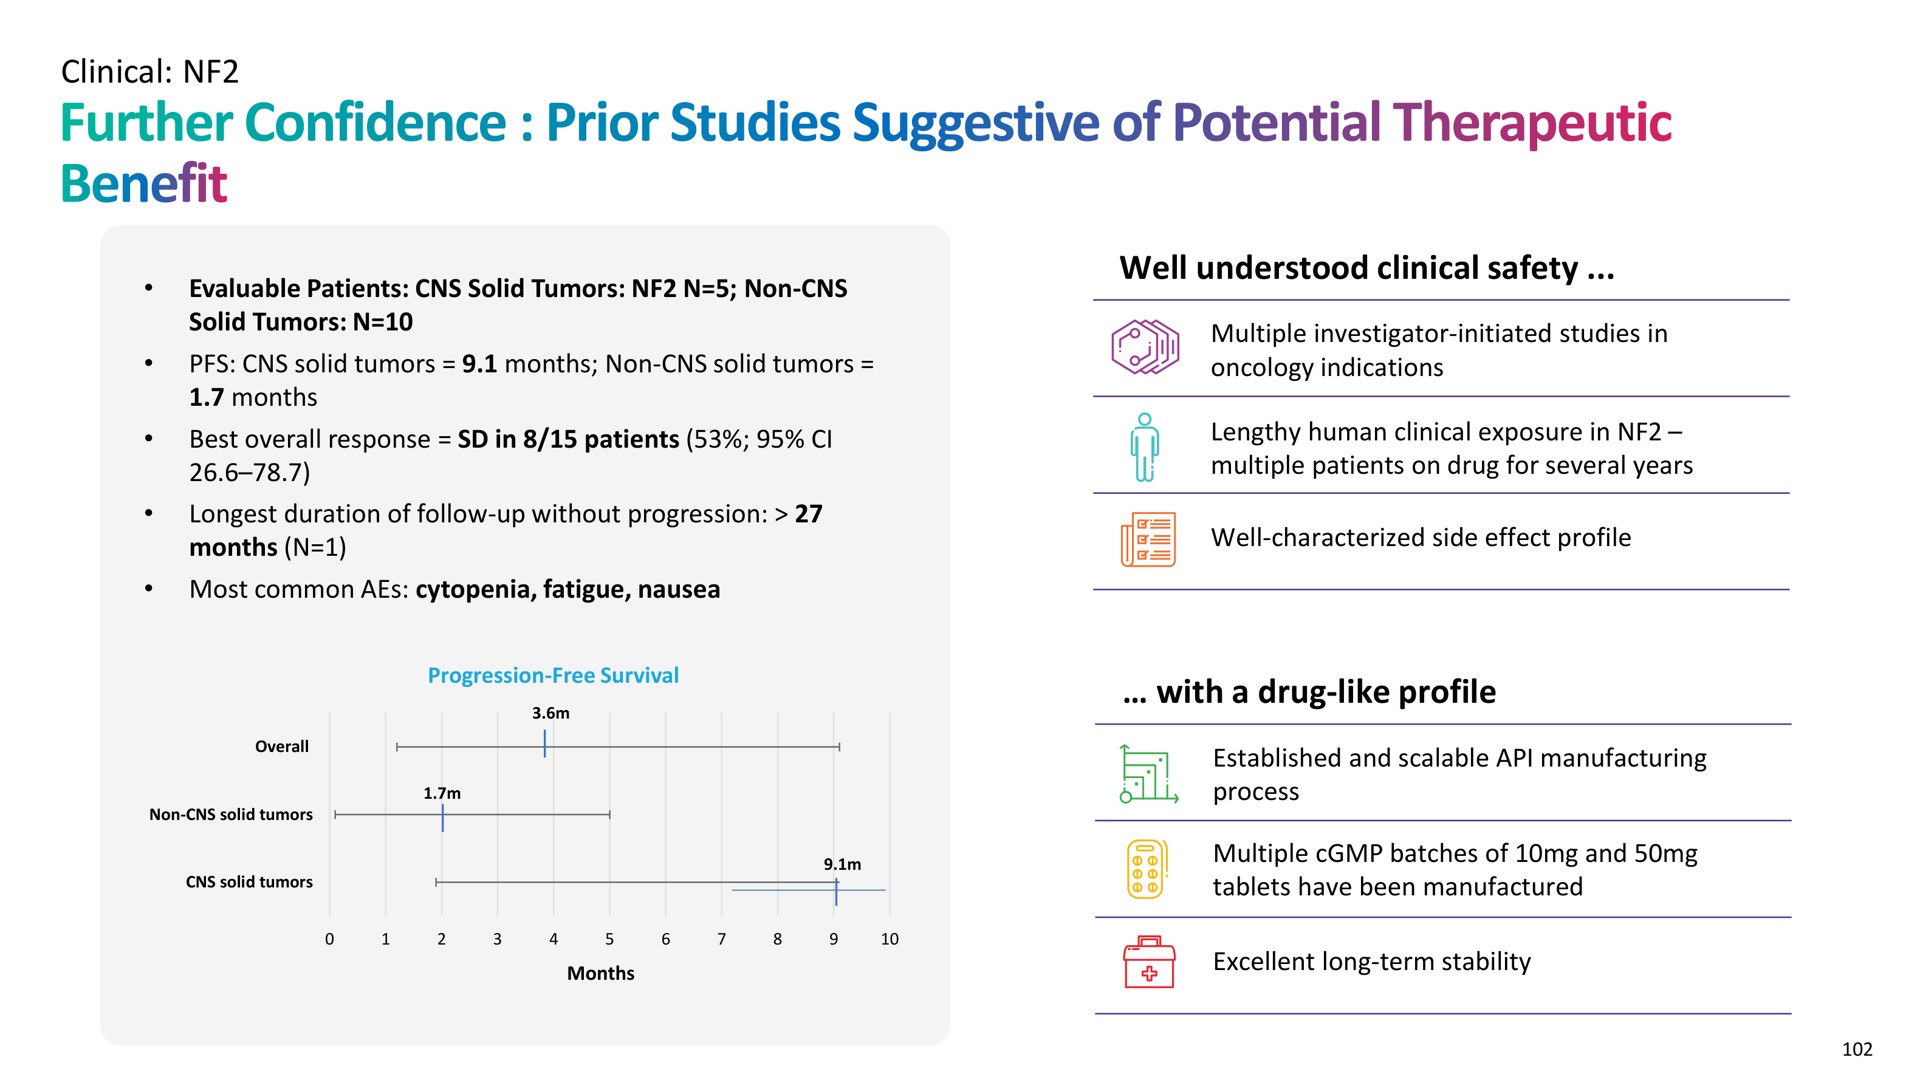 clinical well understood clinical safety with a drug like profile further confidence prior studies suggestive of potential therapeutic benefit | Recursion Pharmaceuticals